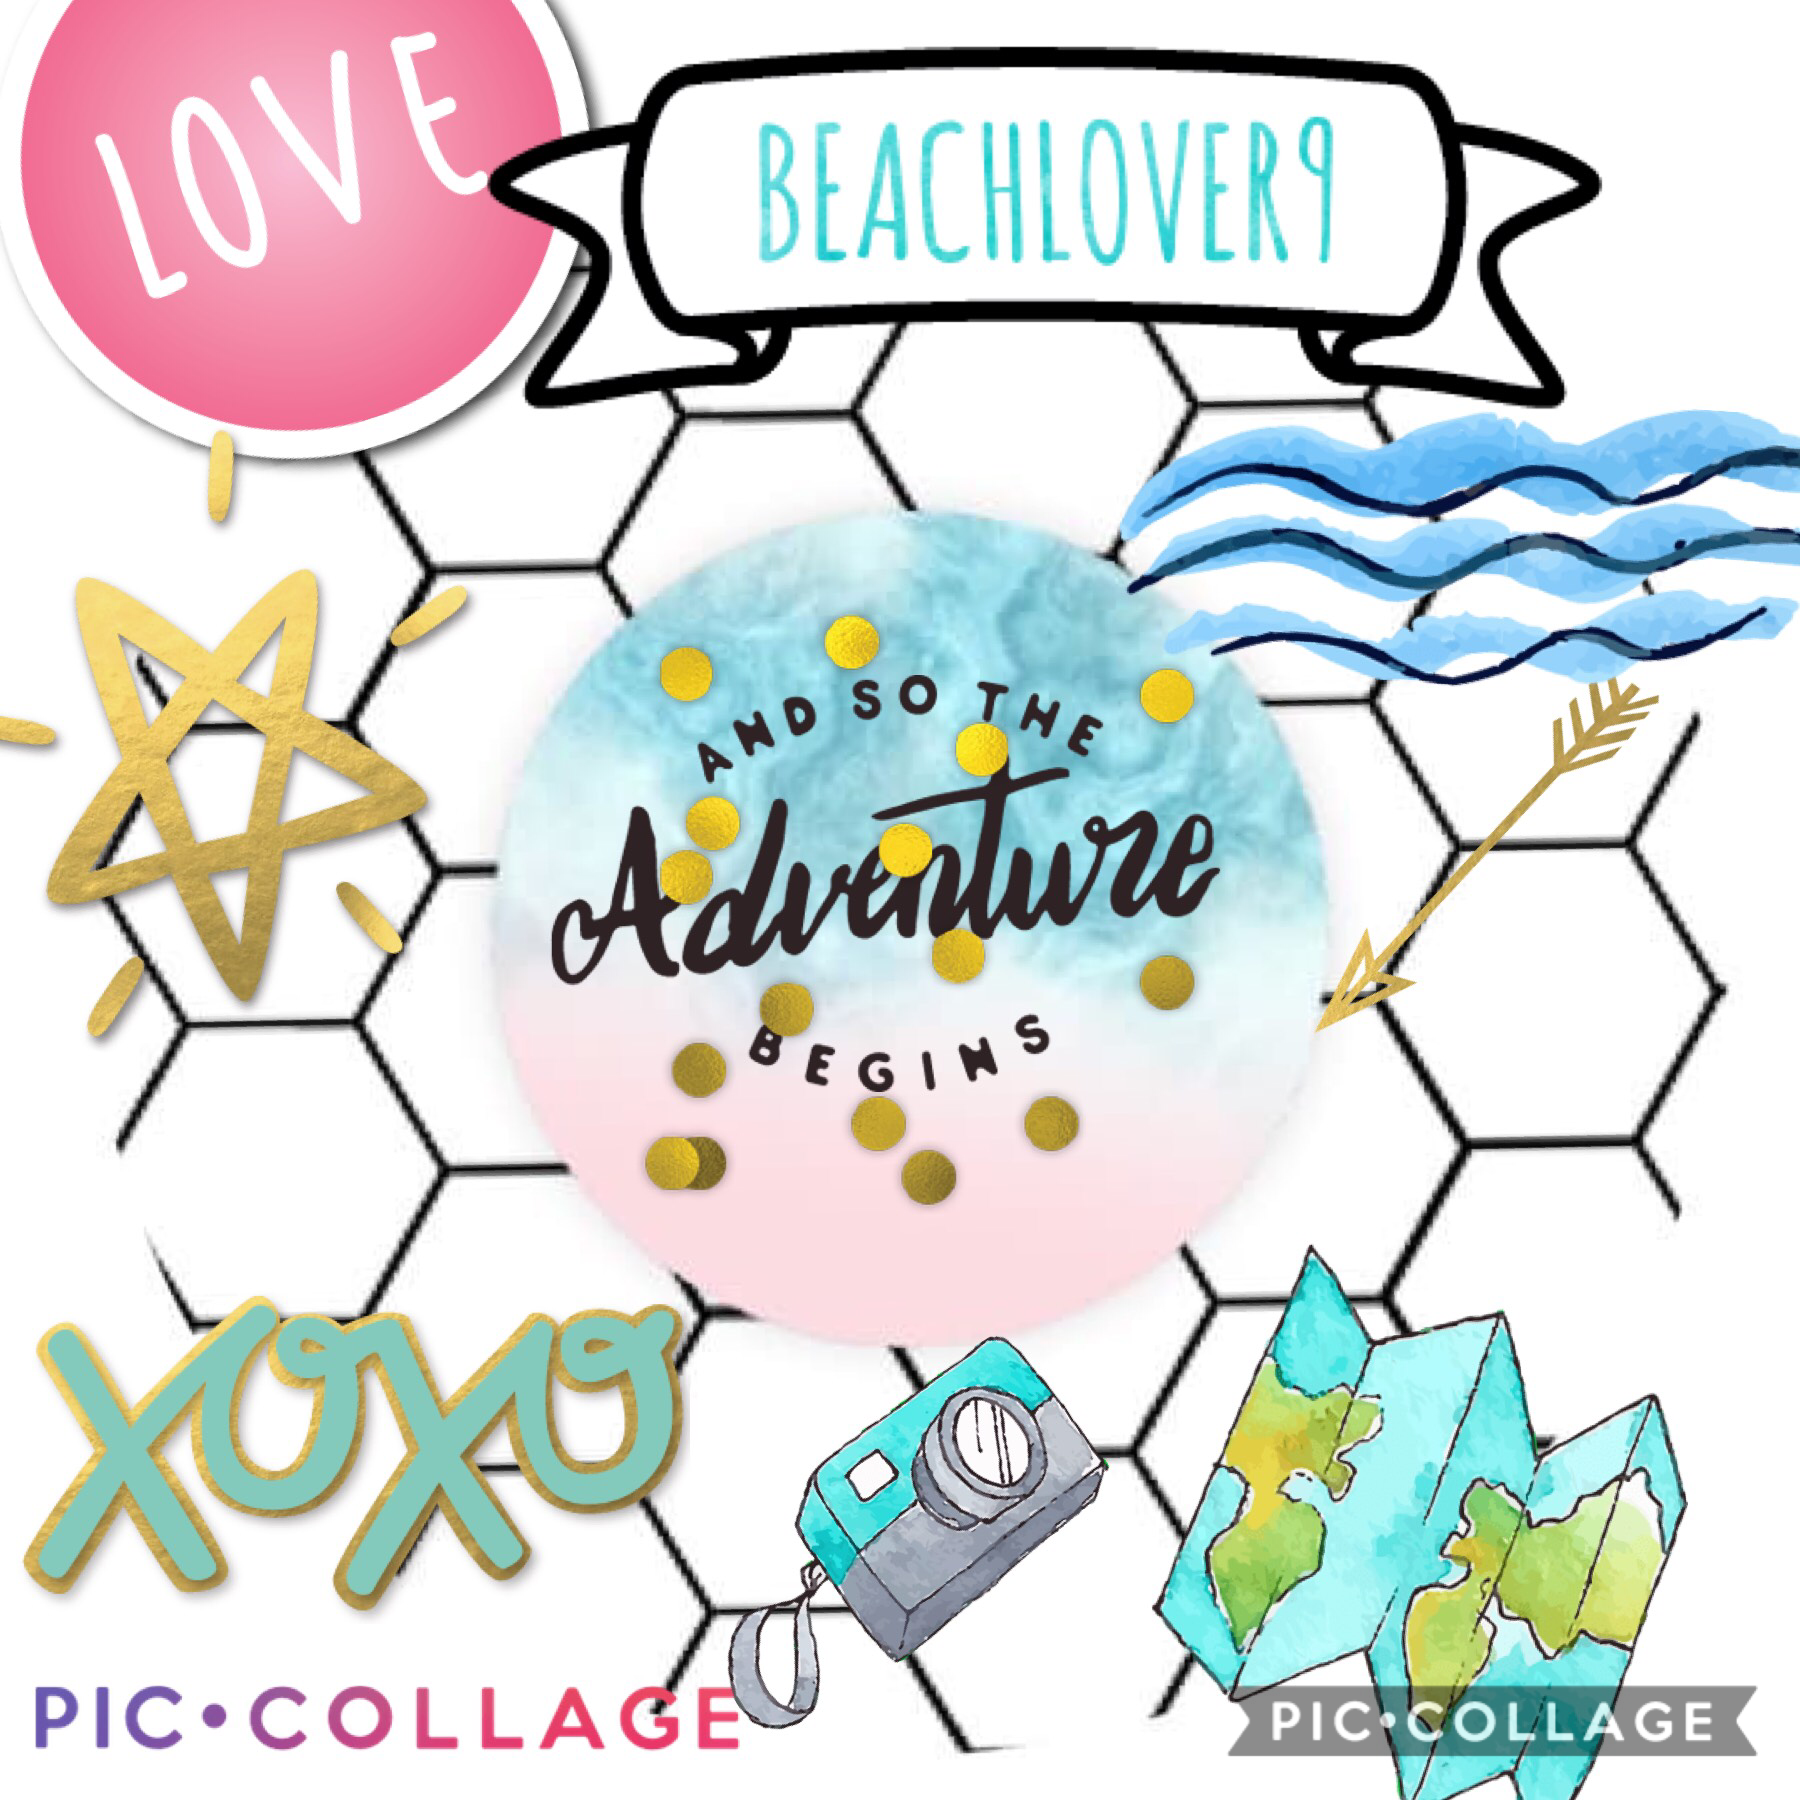 “And so the adventure begins” #adventure #love #xoxo #camera #map #star #wave #beachlover9 #pic collage #hexagon